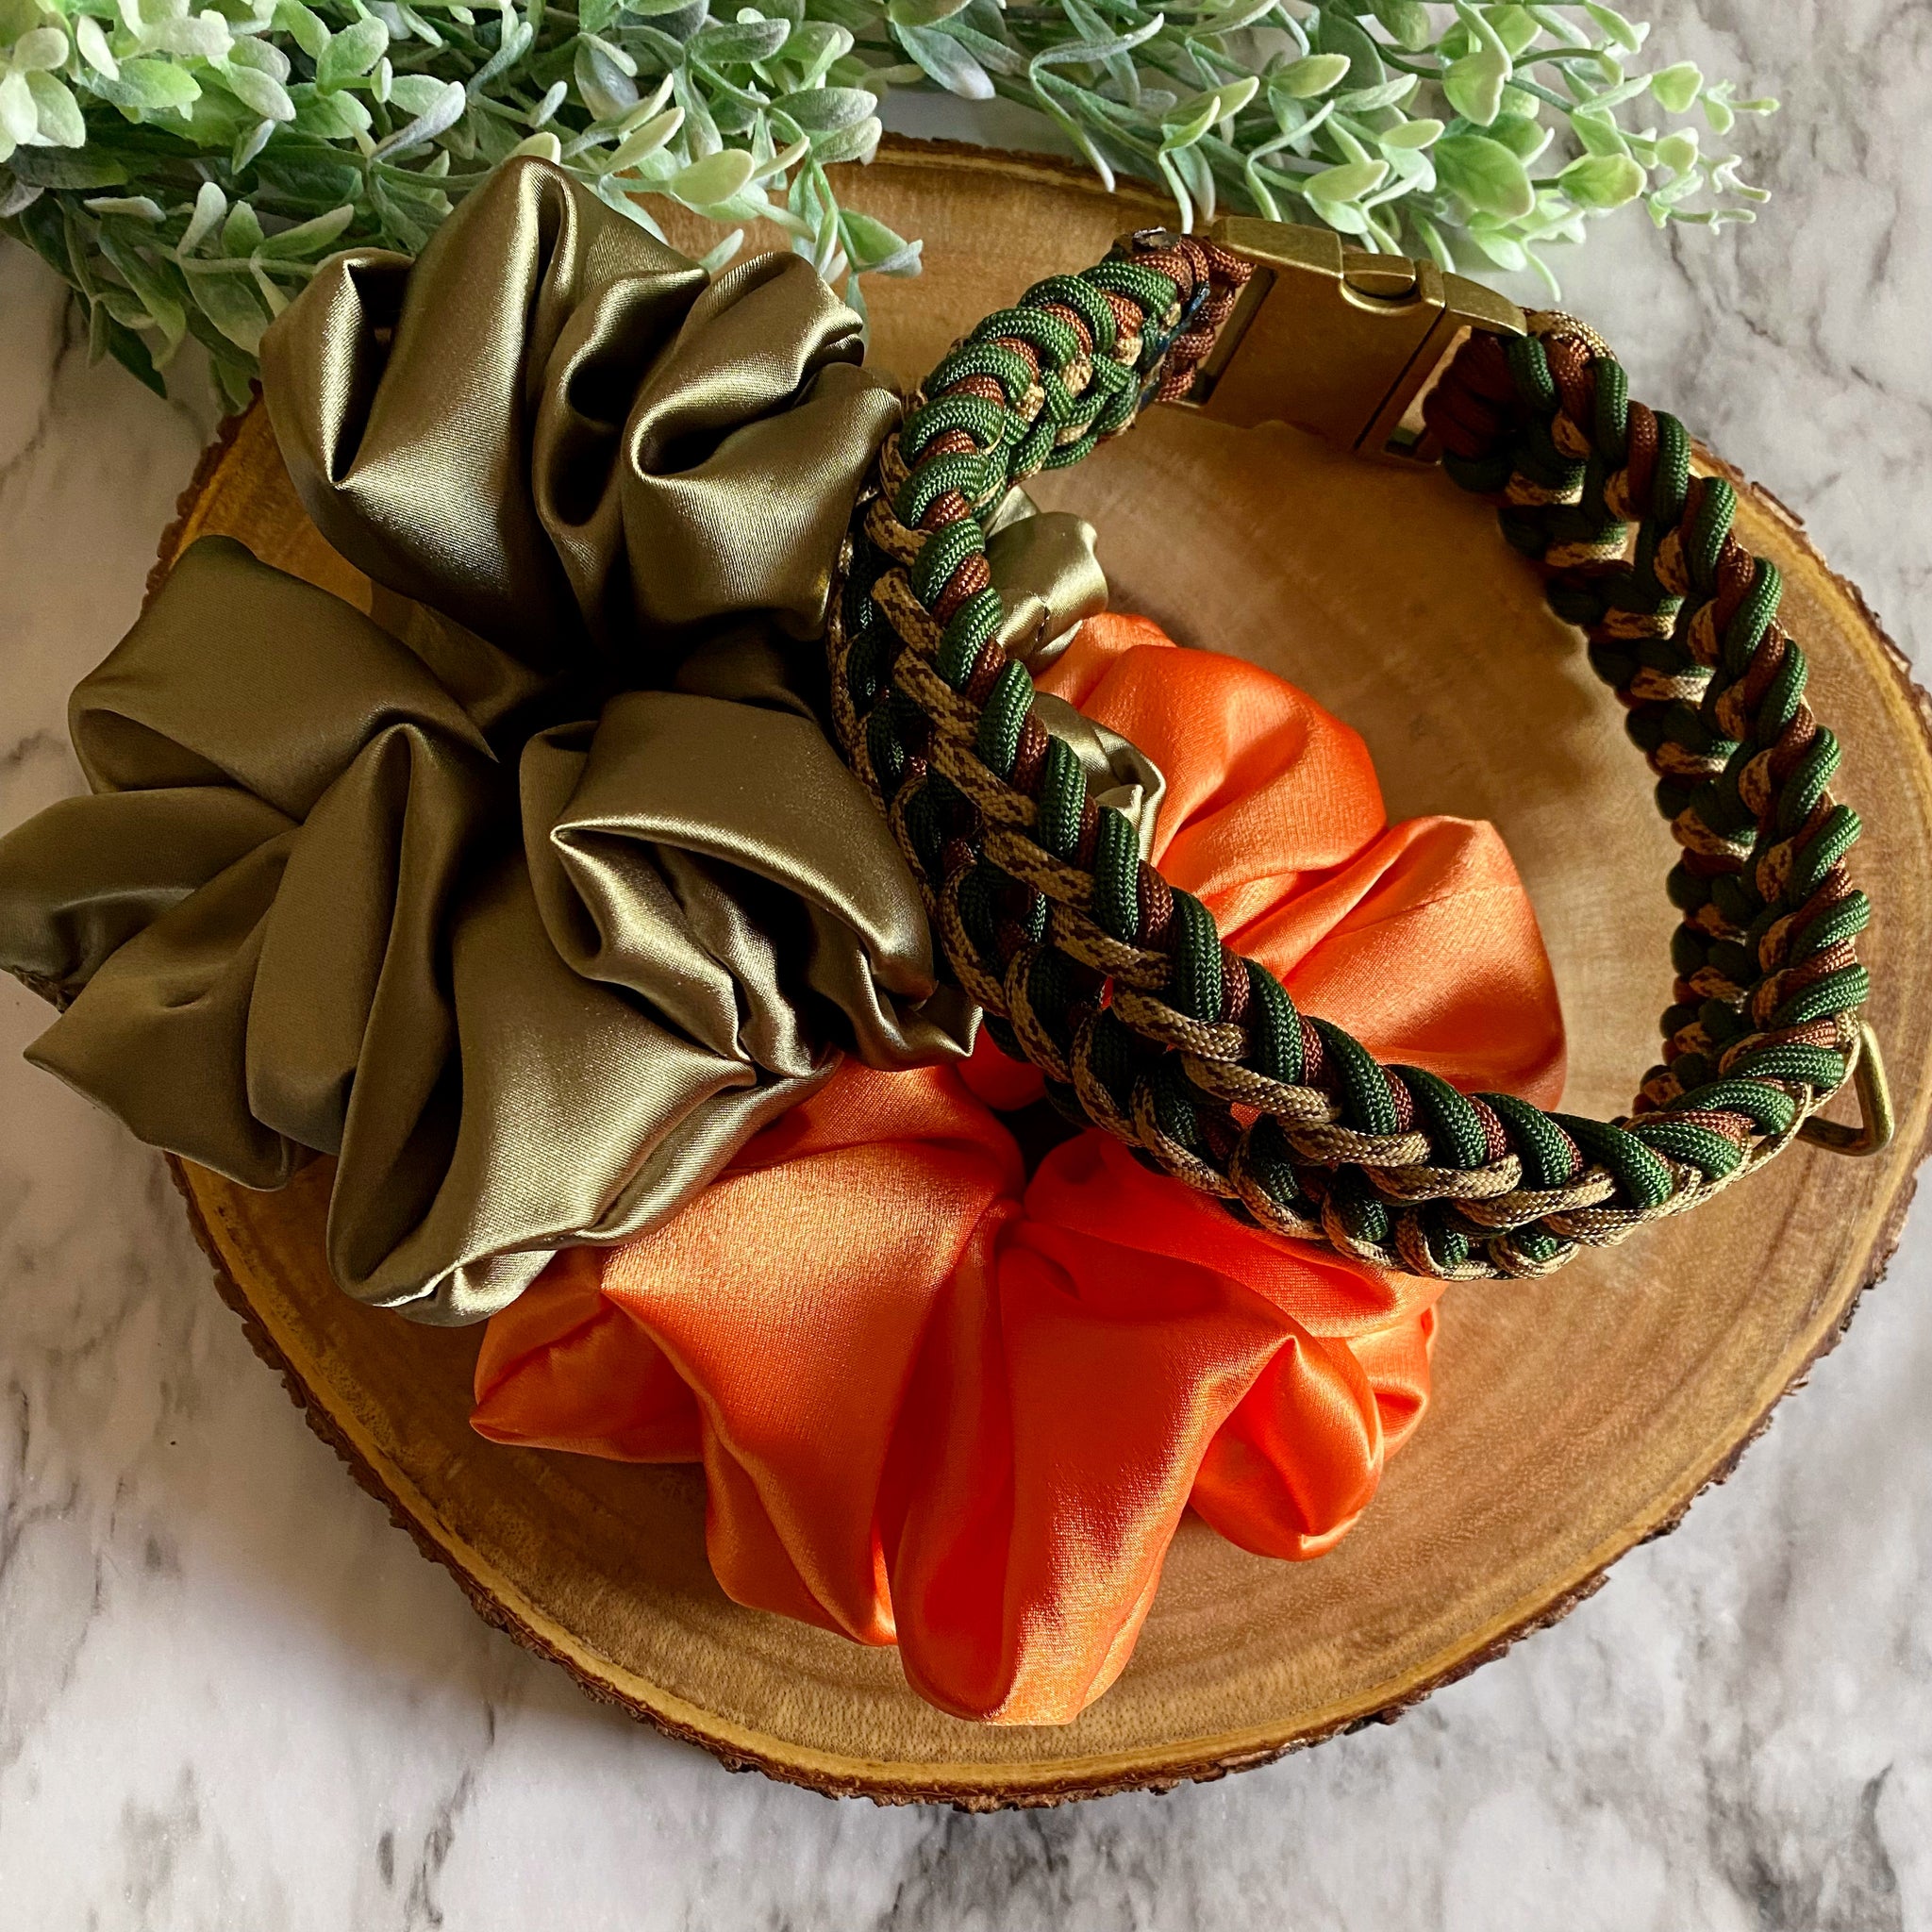 Large Satin Scrunchie - Army Green